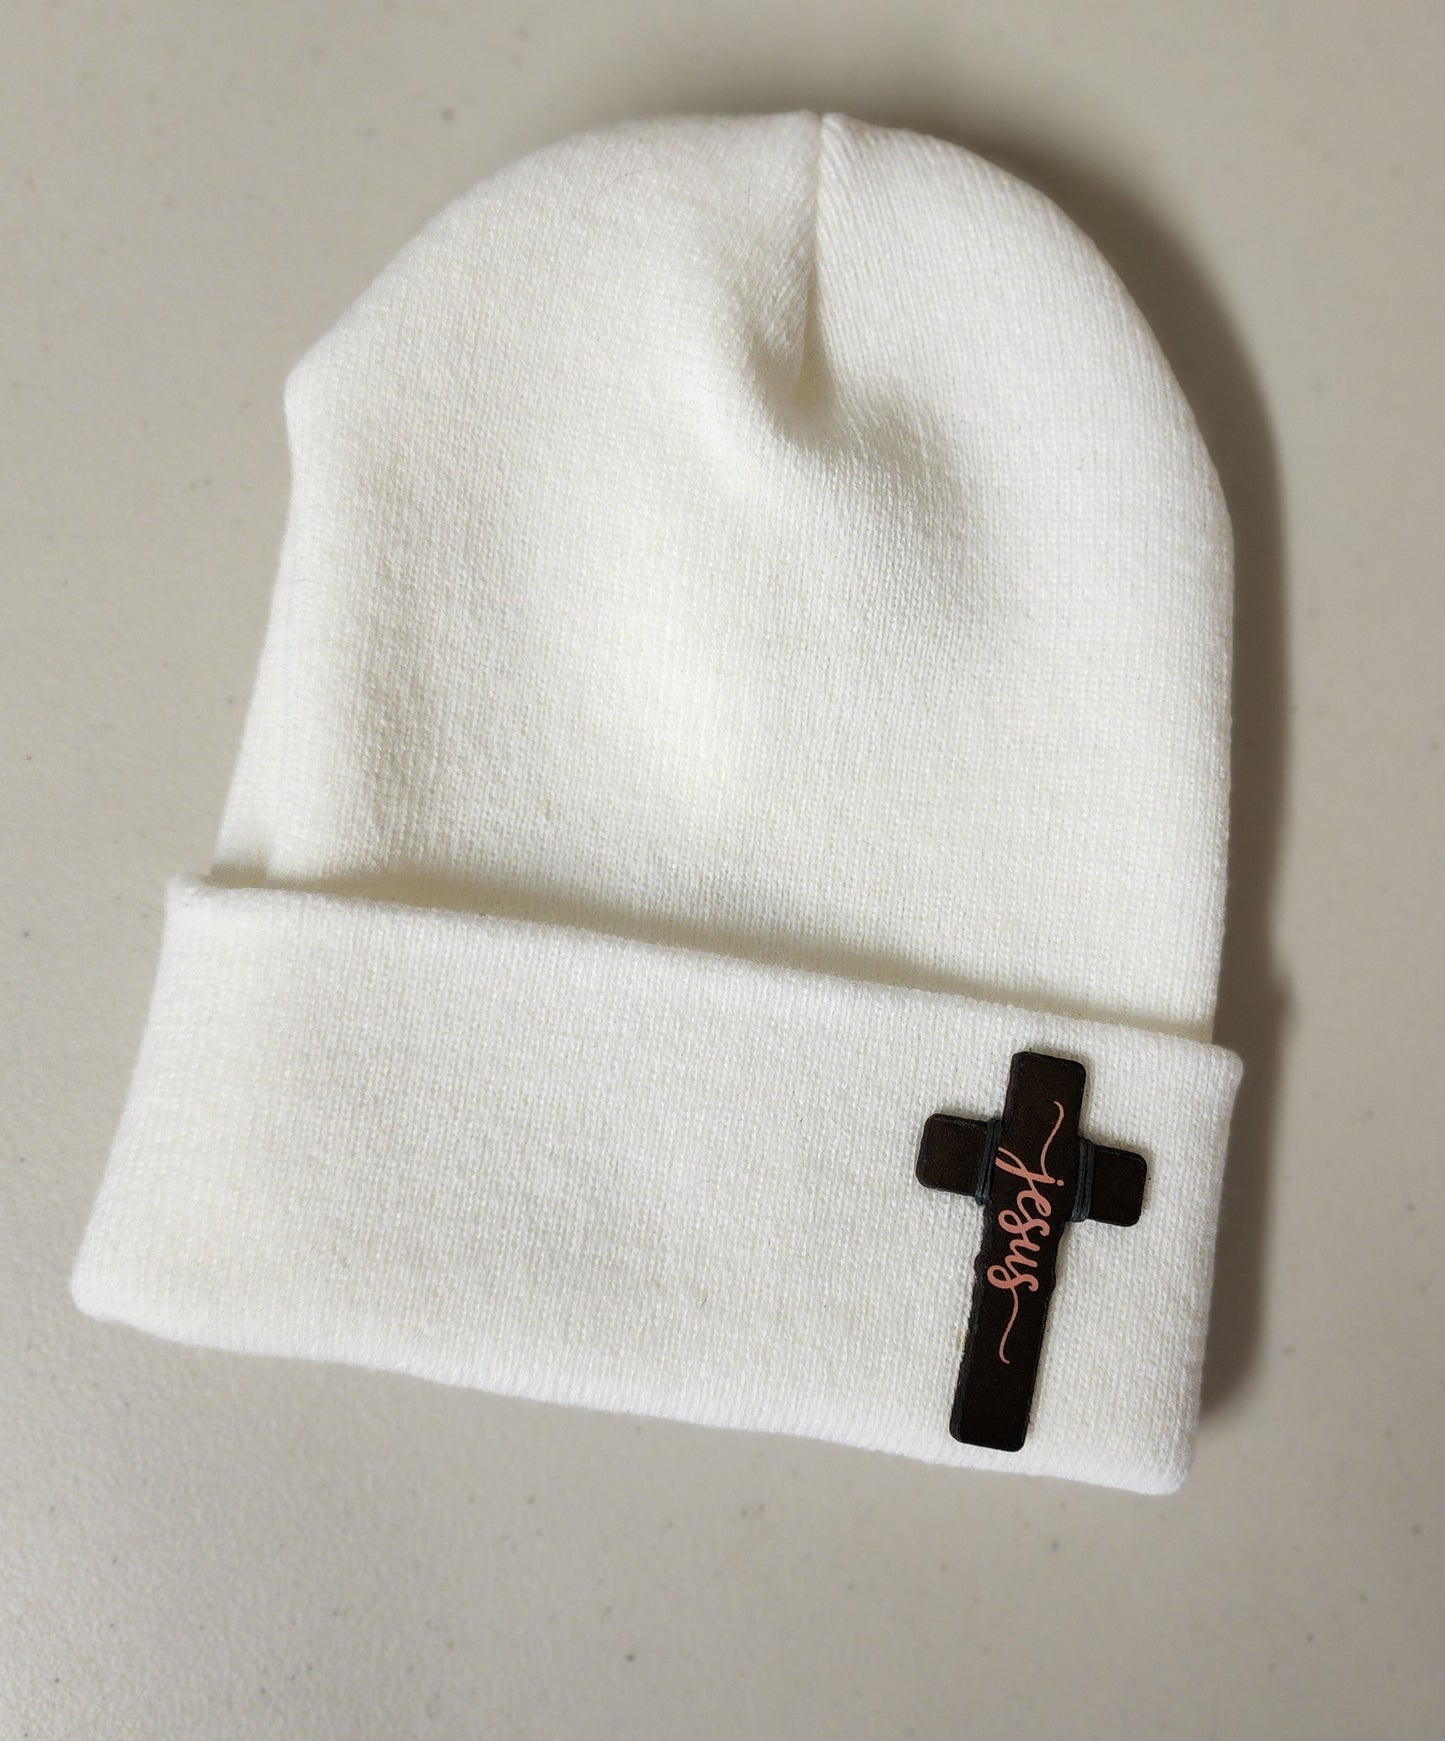 Leather Cross Hat or Beanie